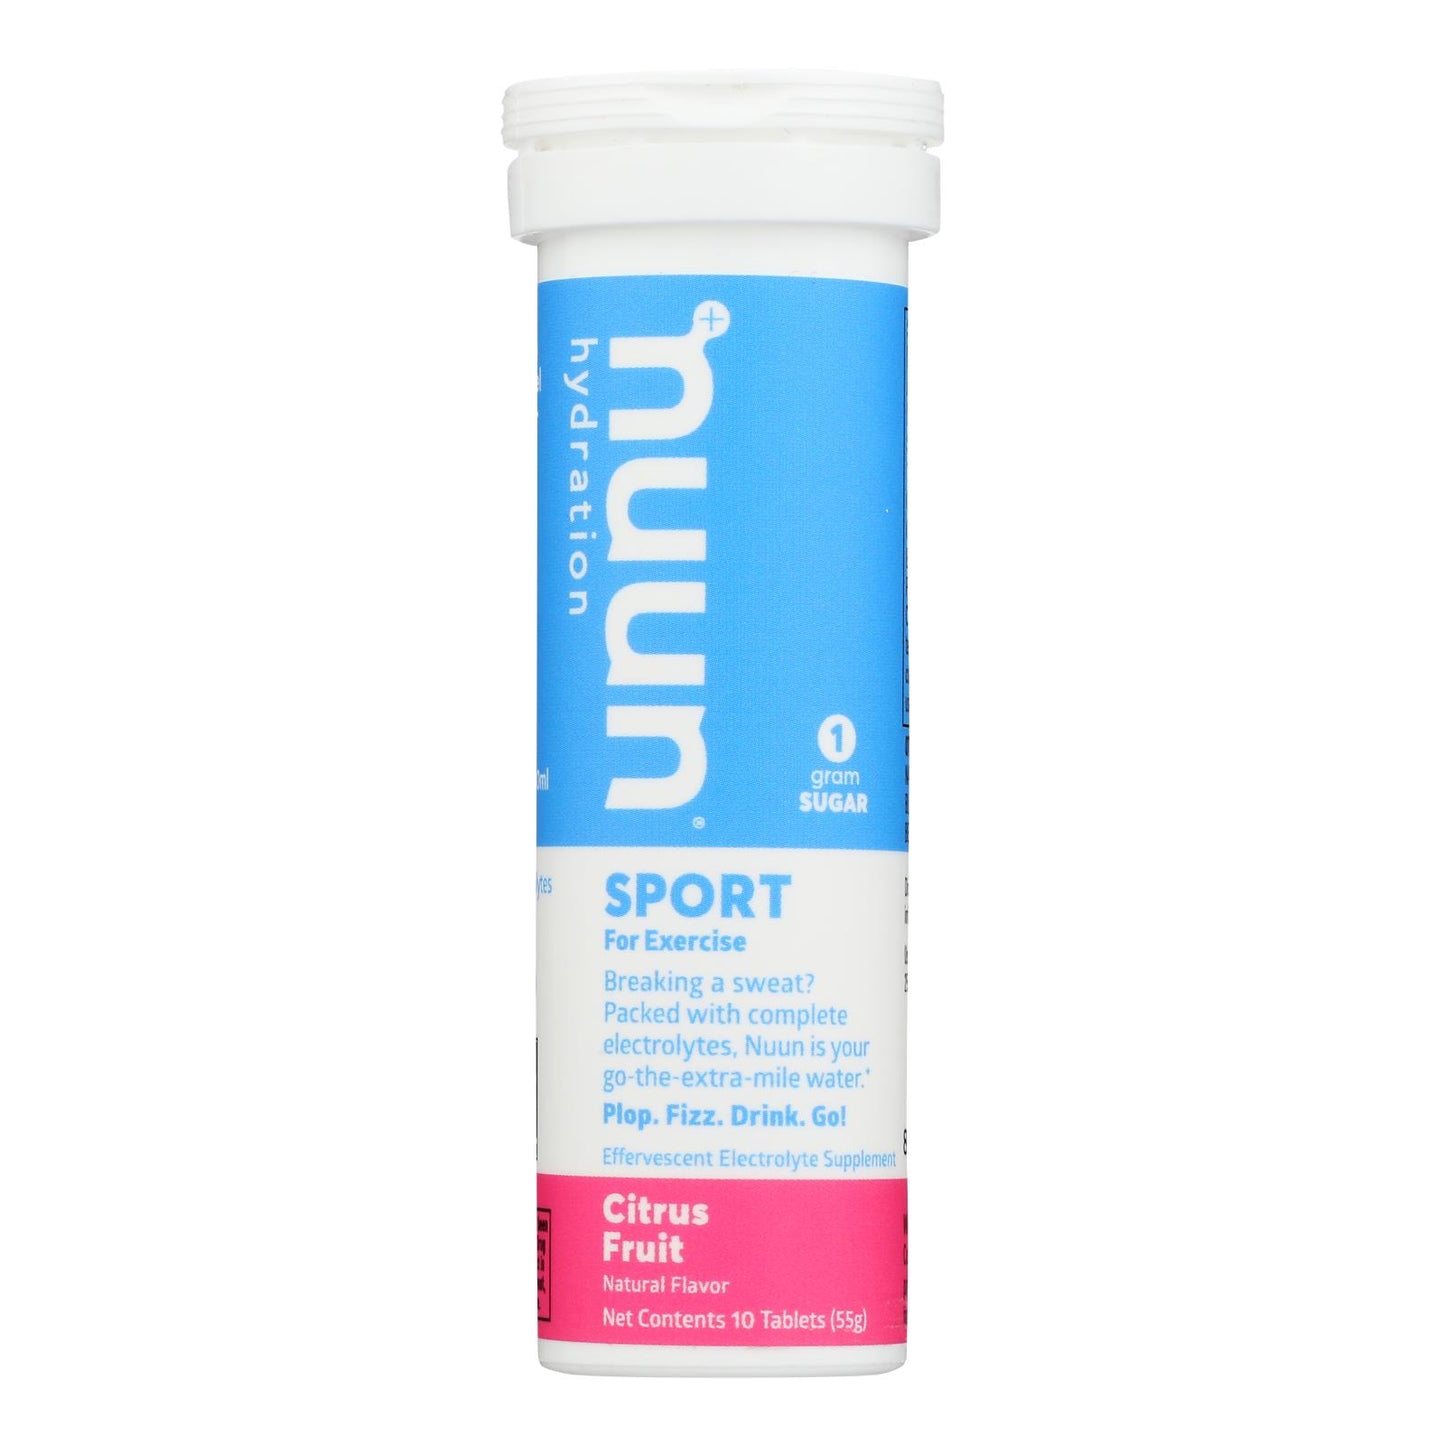 Nuun Hydration Electrolyte Tablets, Citrus Fruit, 10 tablets each, Case Of 8